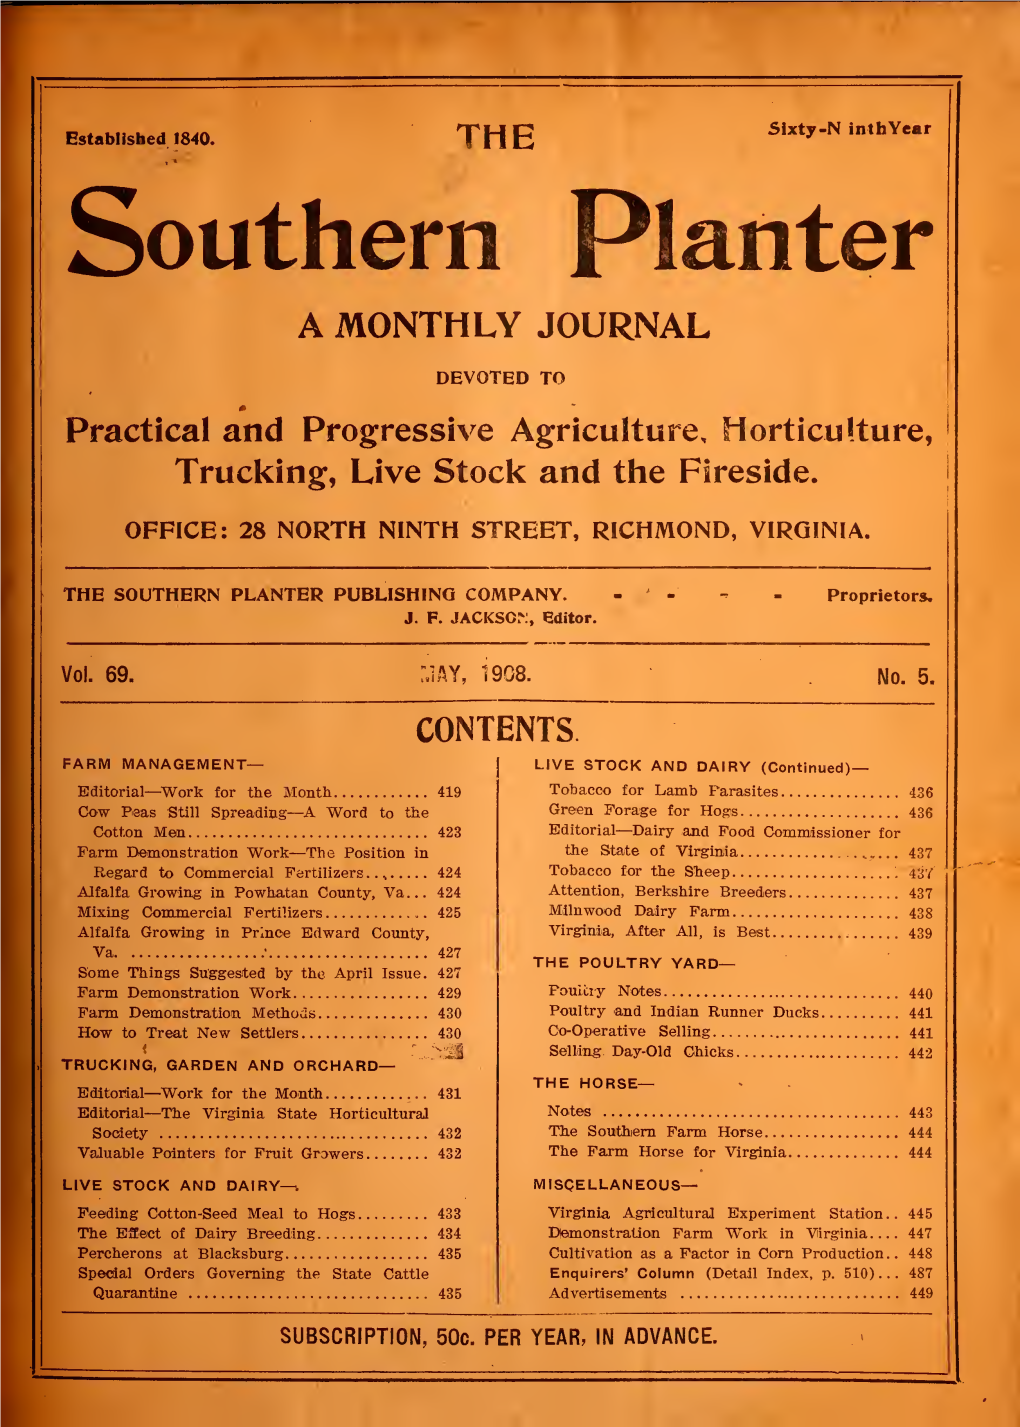 Southern Planter a MONTHLY JOURNAL